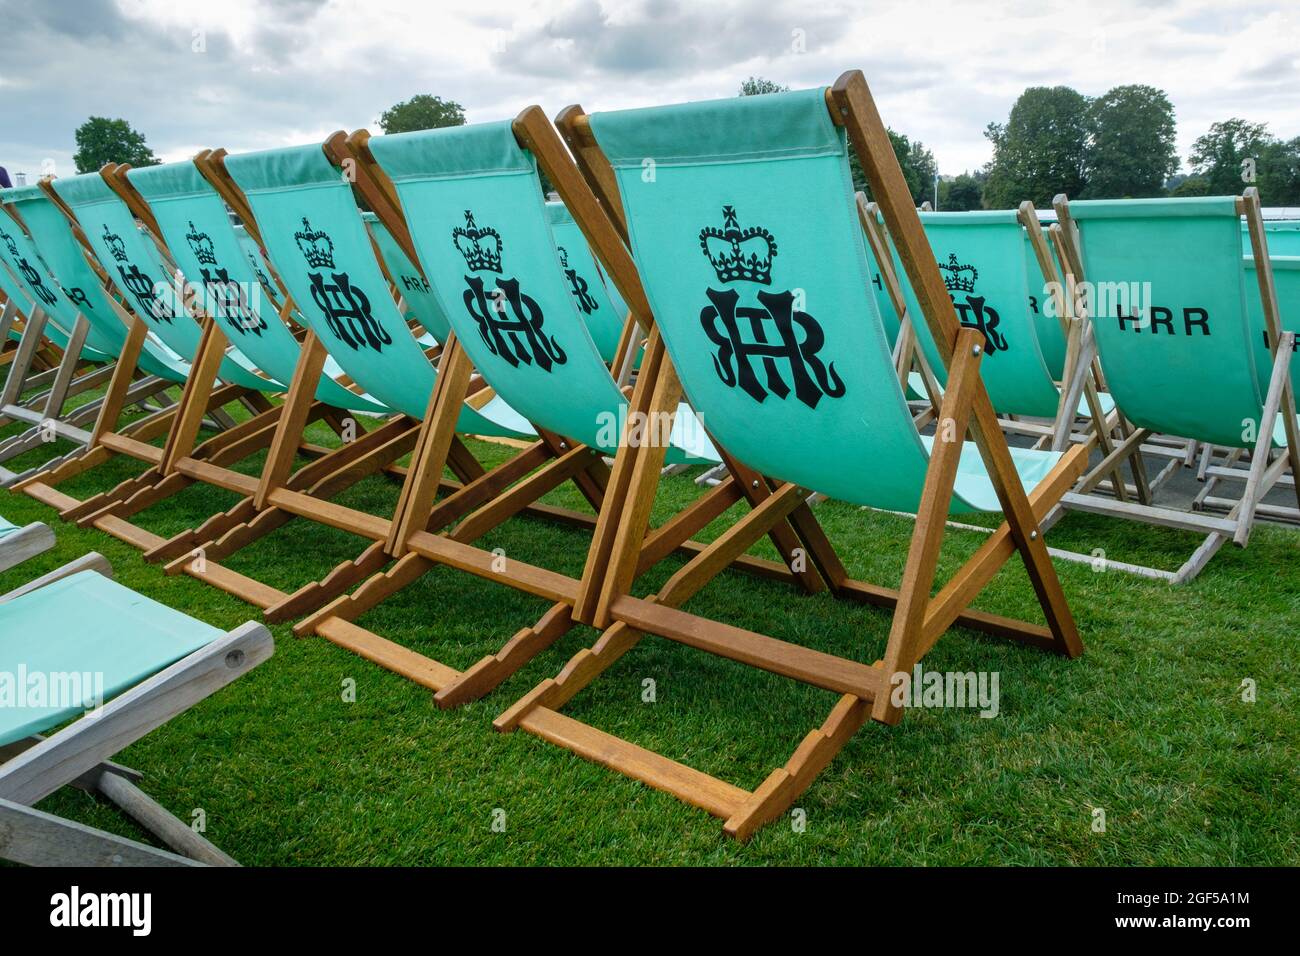 Traditional wooden deck-chairs in the Stewards Enclosure at Henley Royal Regatta 2021 on the River Thames Stock Photo